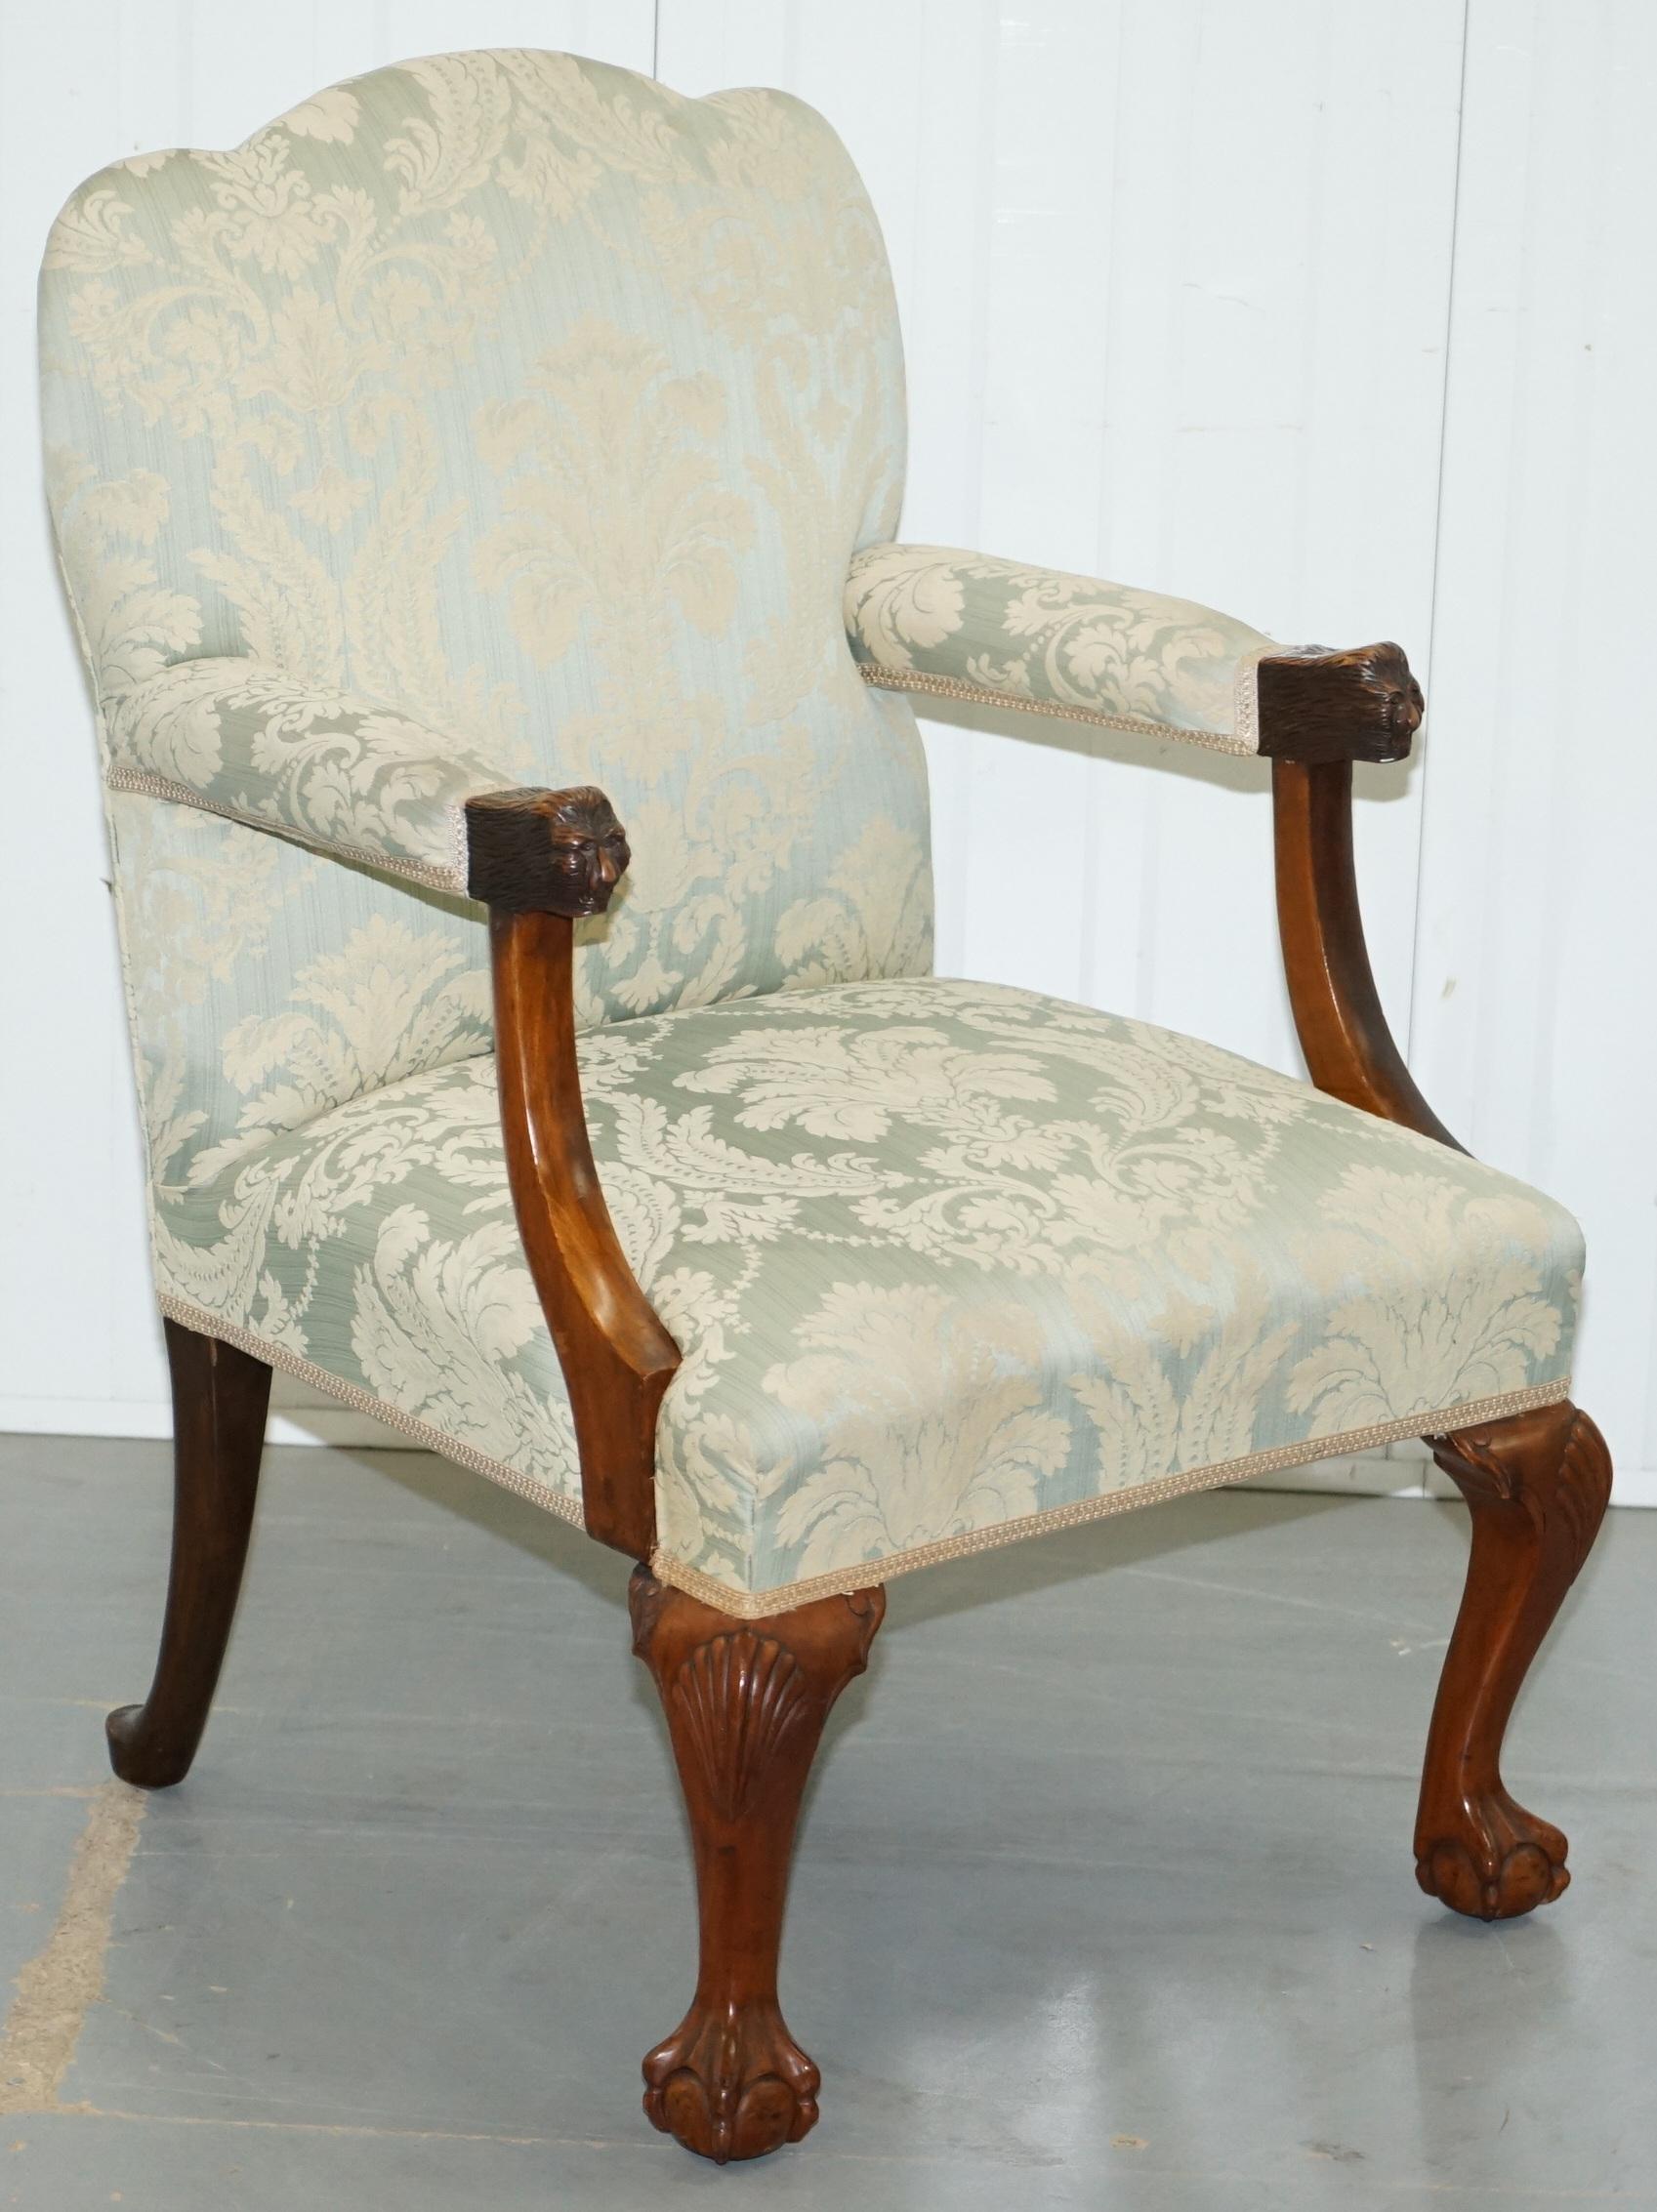 We are delighted to offer for sale this lovely, circa 1890-1900 Victorian Walnut Gainsborough carver armchair in the Georgian Irish manor with claw and ball cabriolet legs finished with Acanthus leaves

A very good looking and comfortable